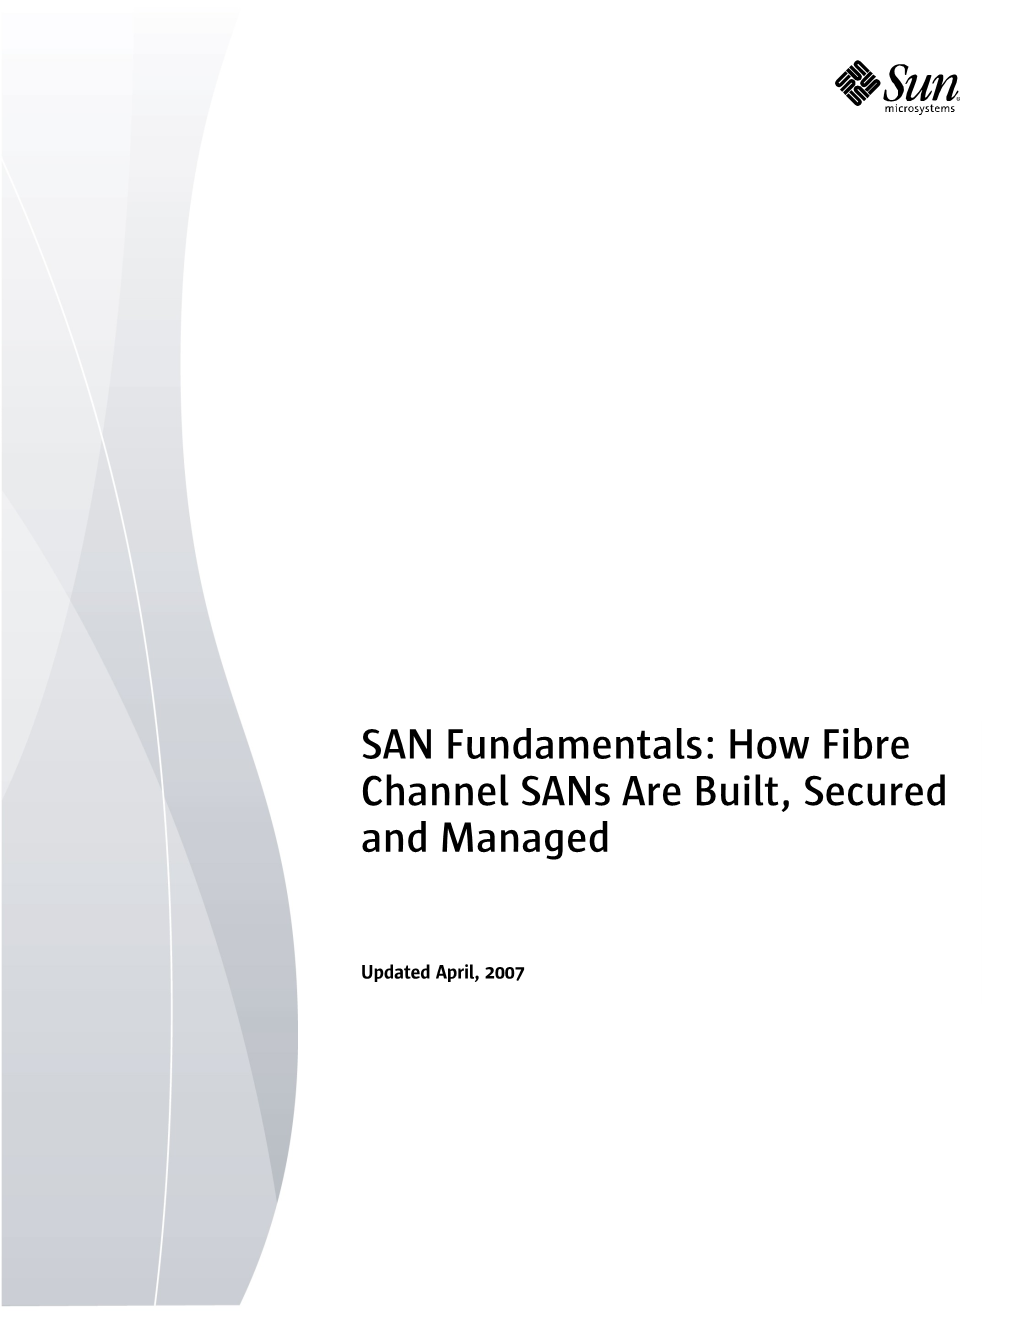 SAN Fundamentals: How Fibre Channel Sans Are Built, Secured and Managed